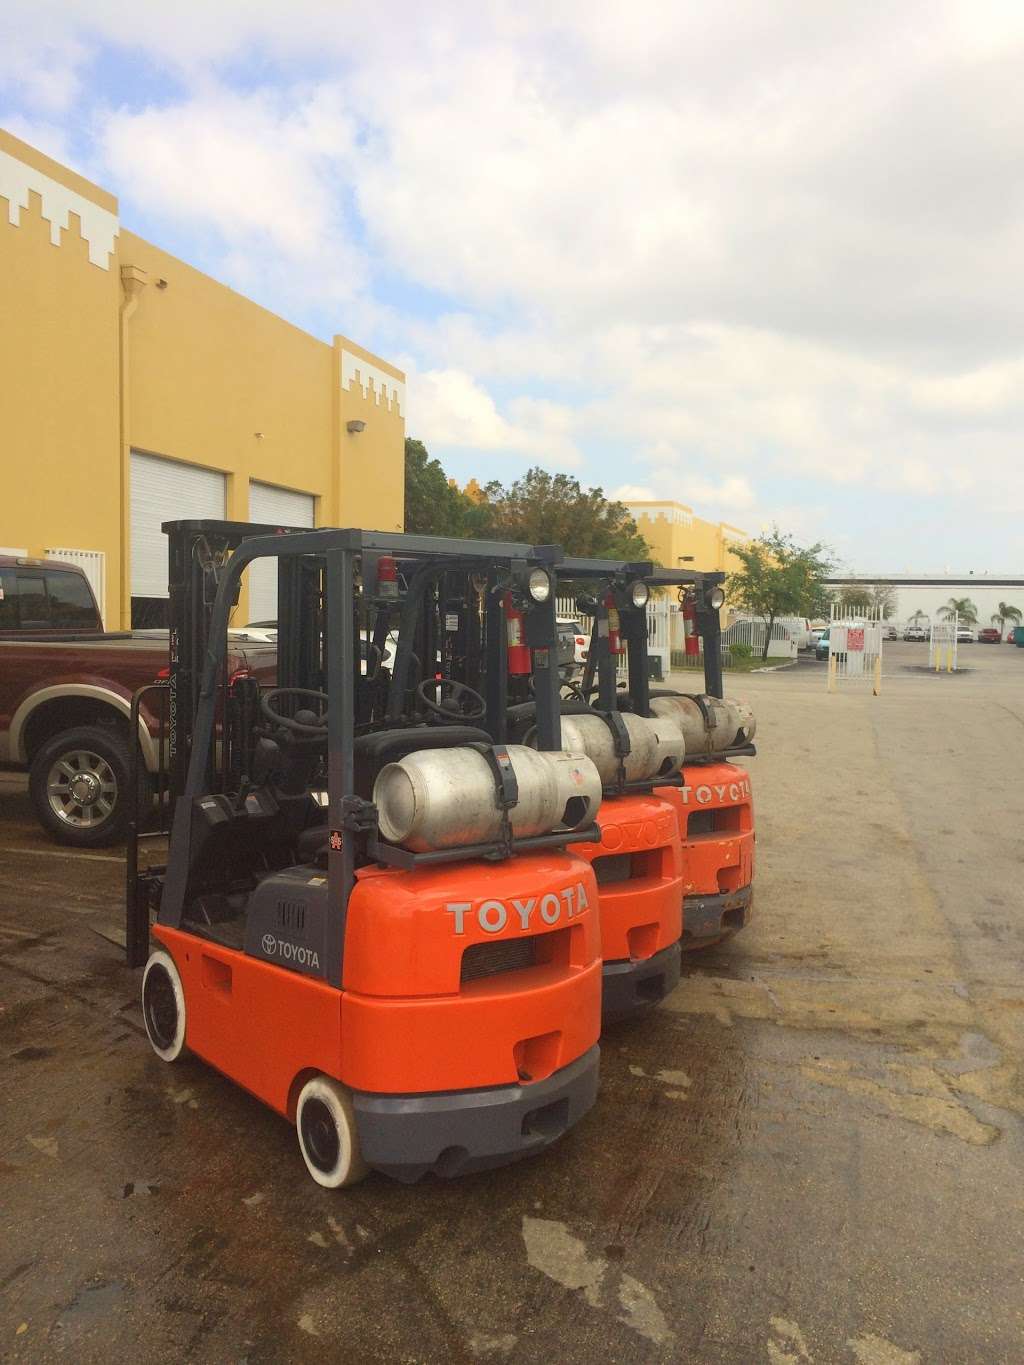 Action Forklift Inc. | 3888 NW 125th St, Opa-locka, FL 33054 | Phone: (305) 525-4849